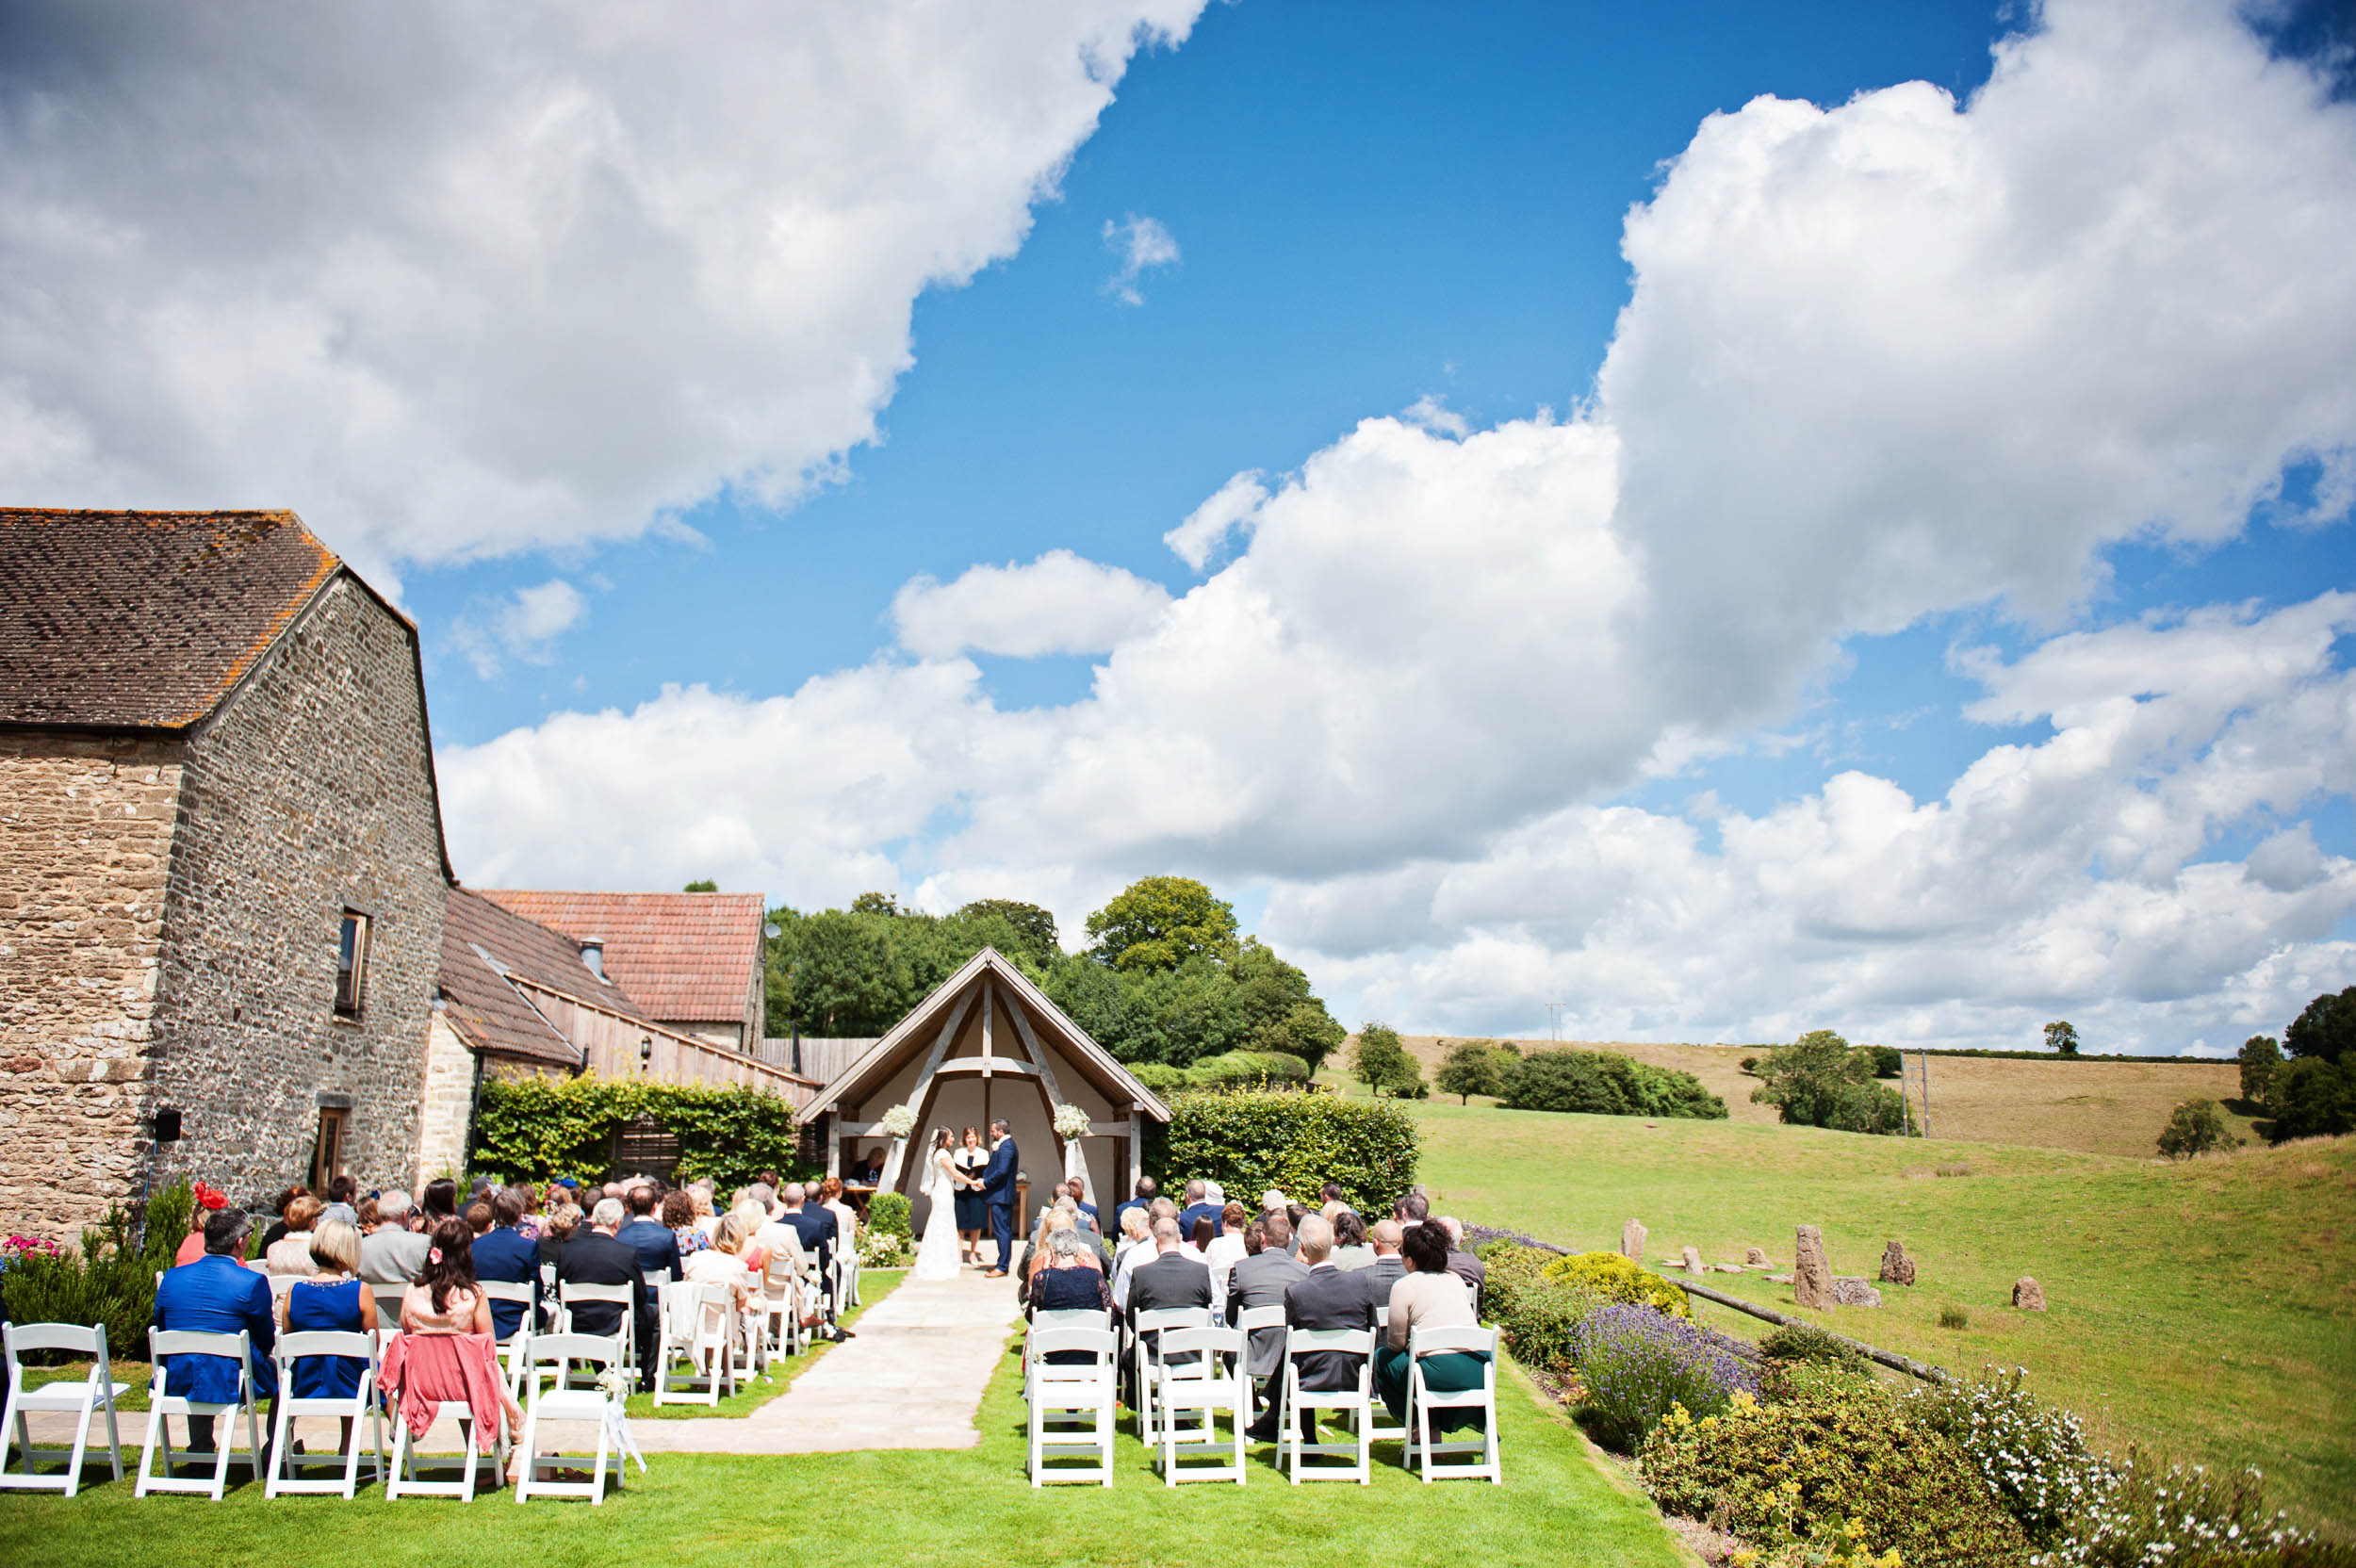 A Bride and Groom say their vow's outside, at the Cotswold Wedding Venue, The Kingscote Barn.